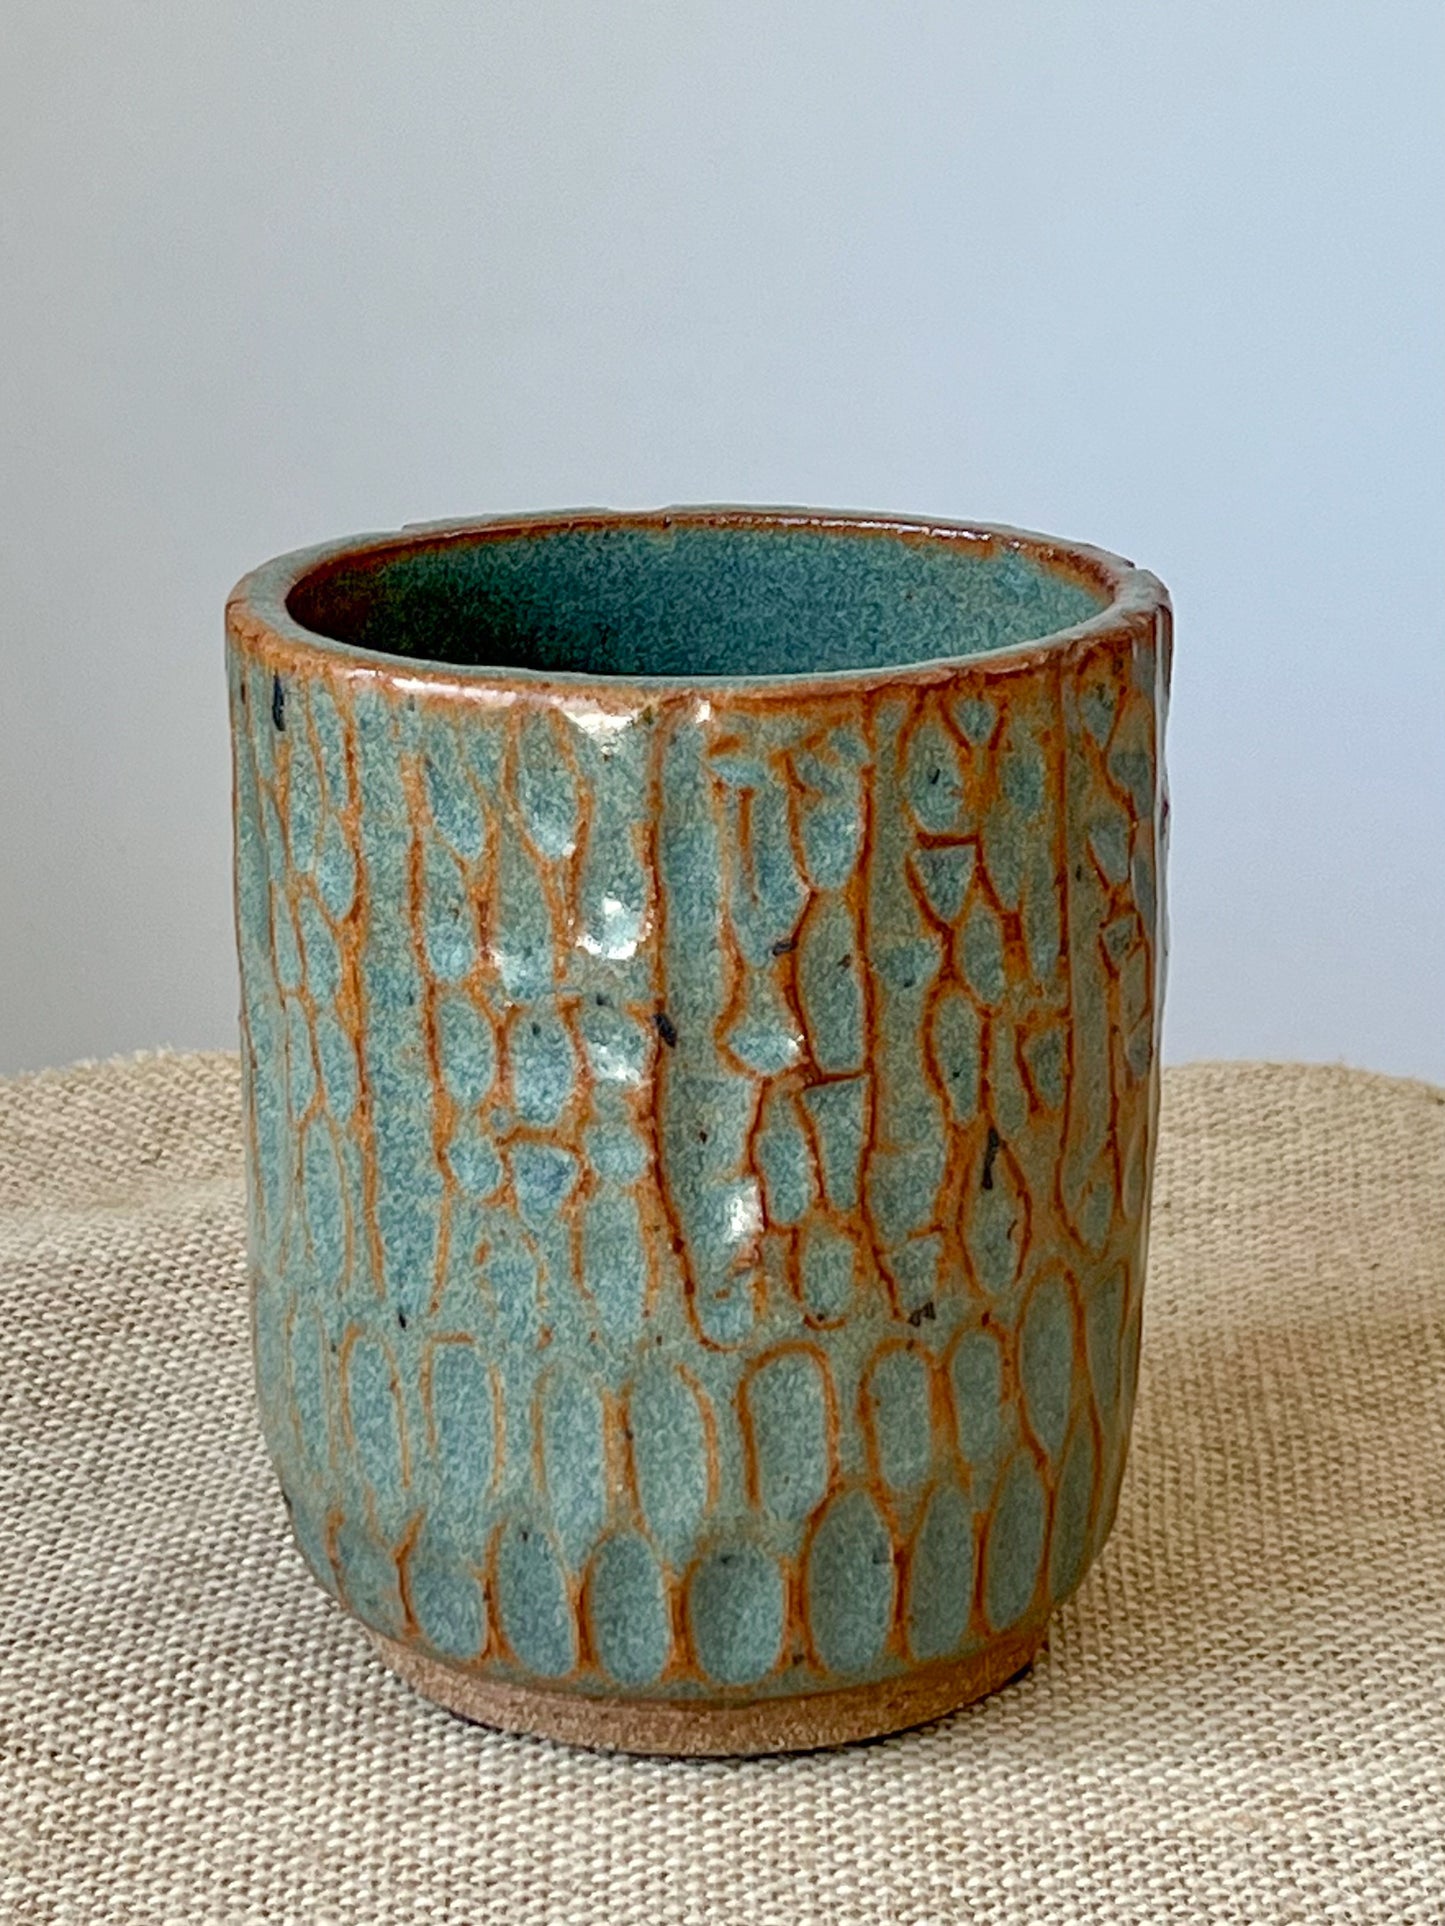 Wheel thrown cylinder using brown stoneware clay. Top rim is altered to an oval. Hand carved texture is highlighted with the blue green glaze.